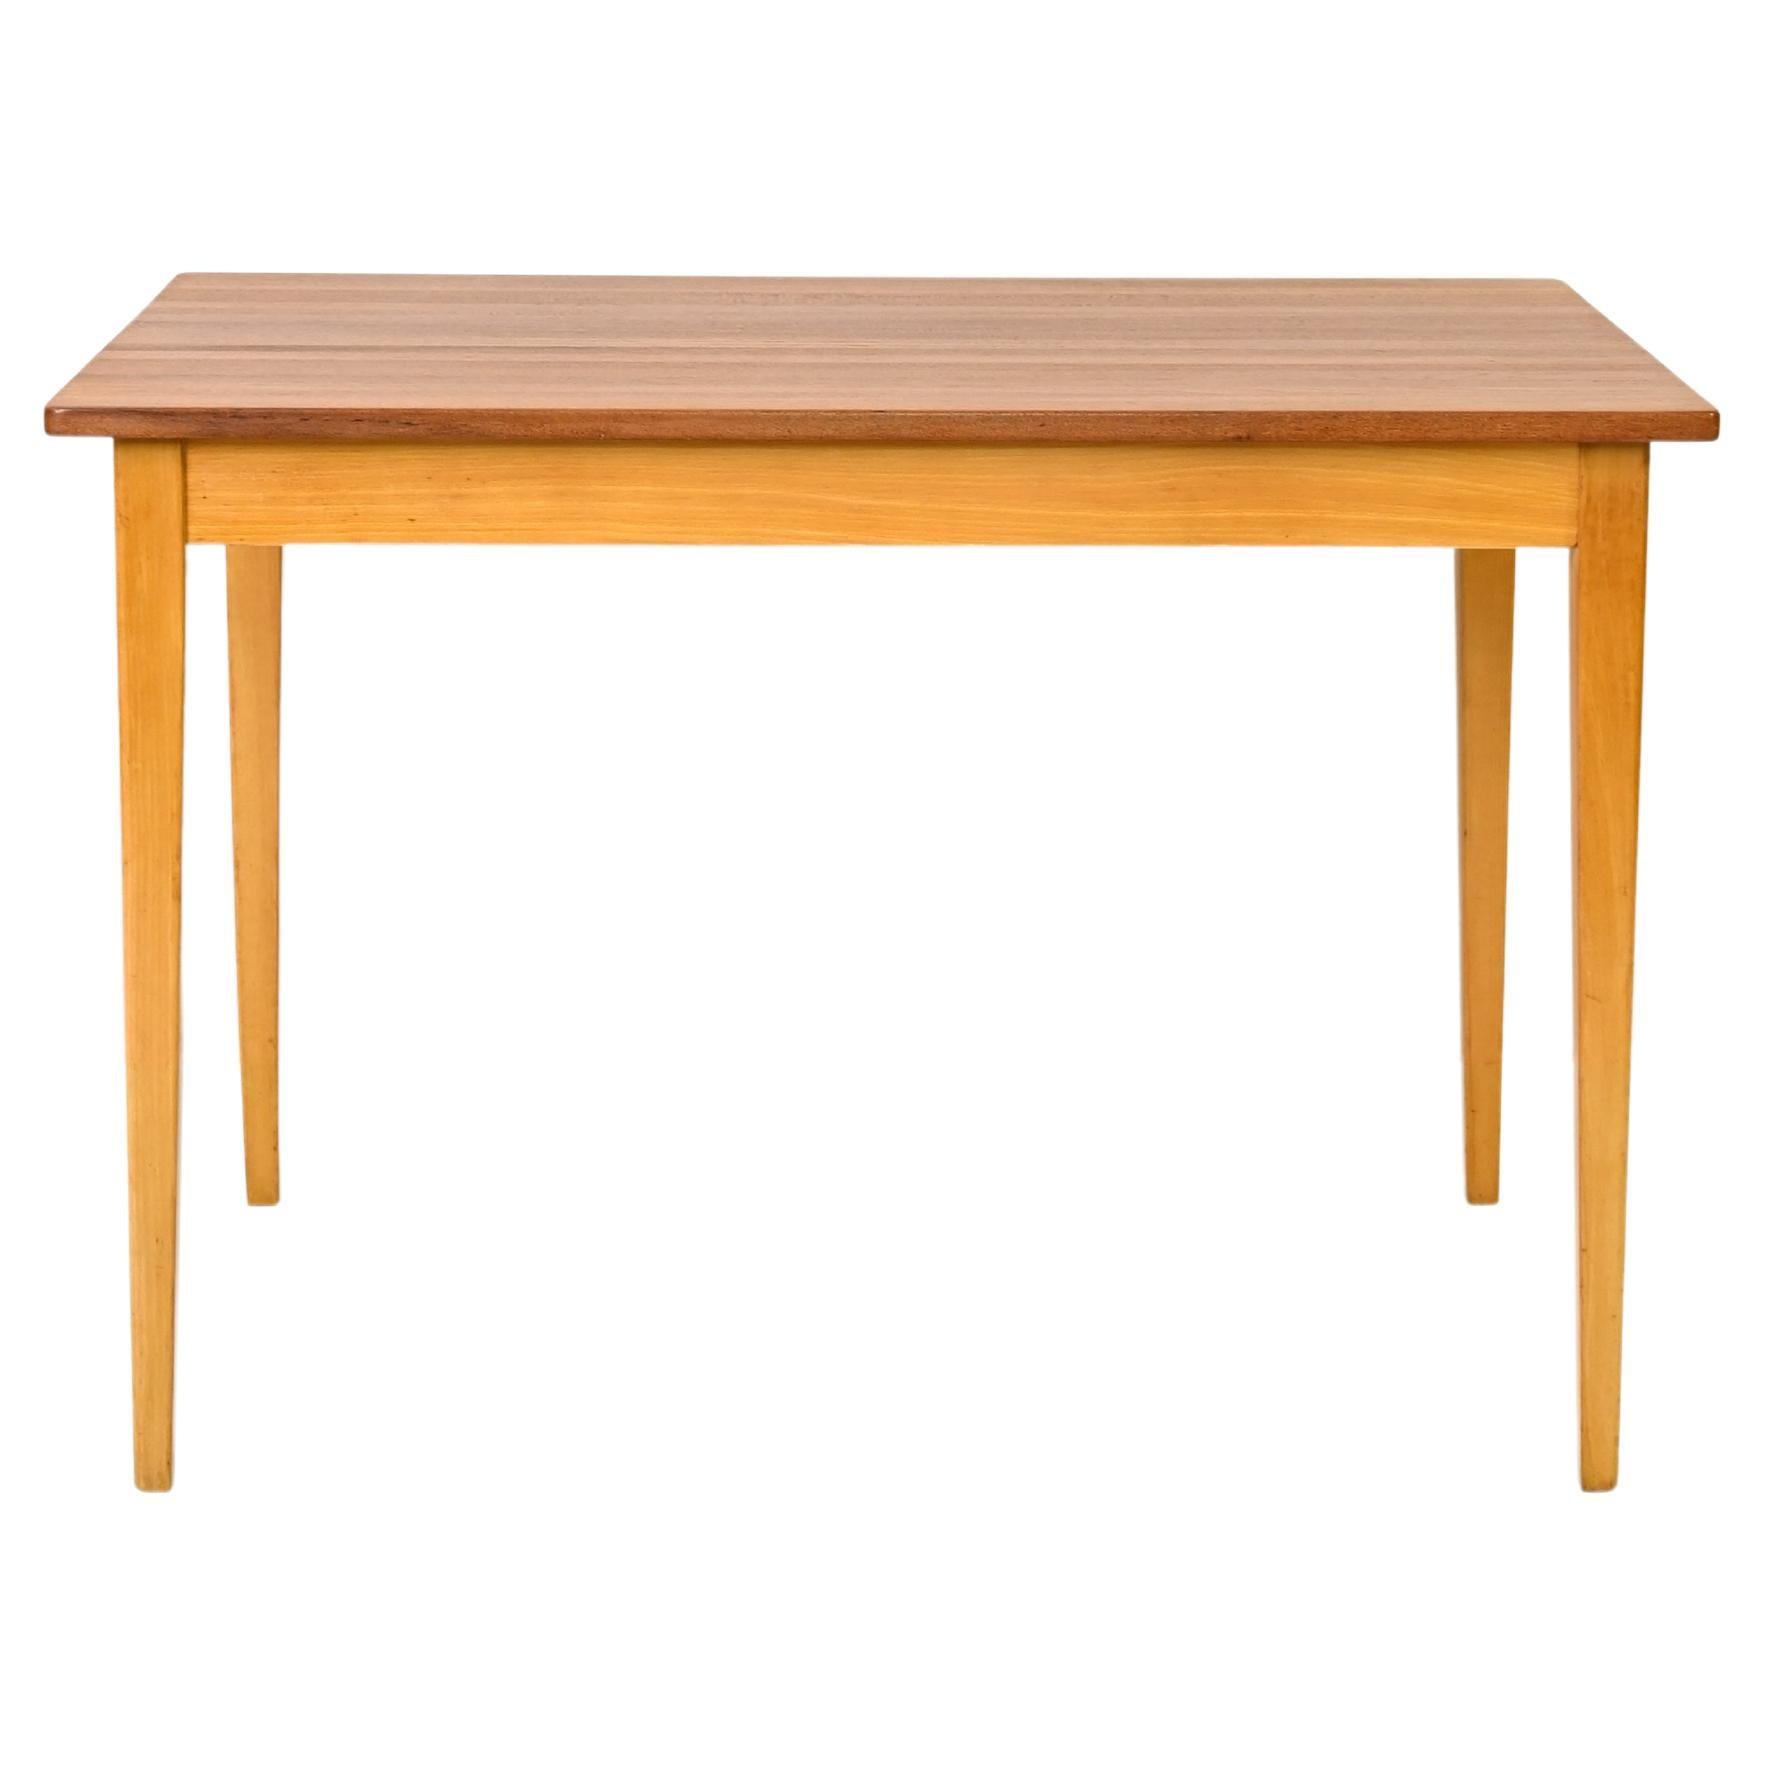 Nordic-made teak dining table For Sale